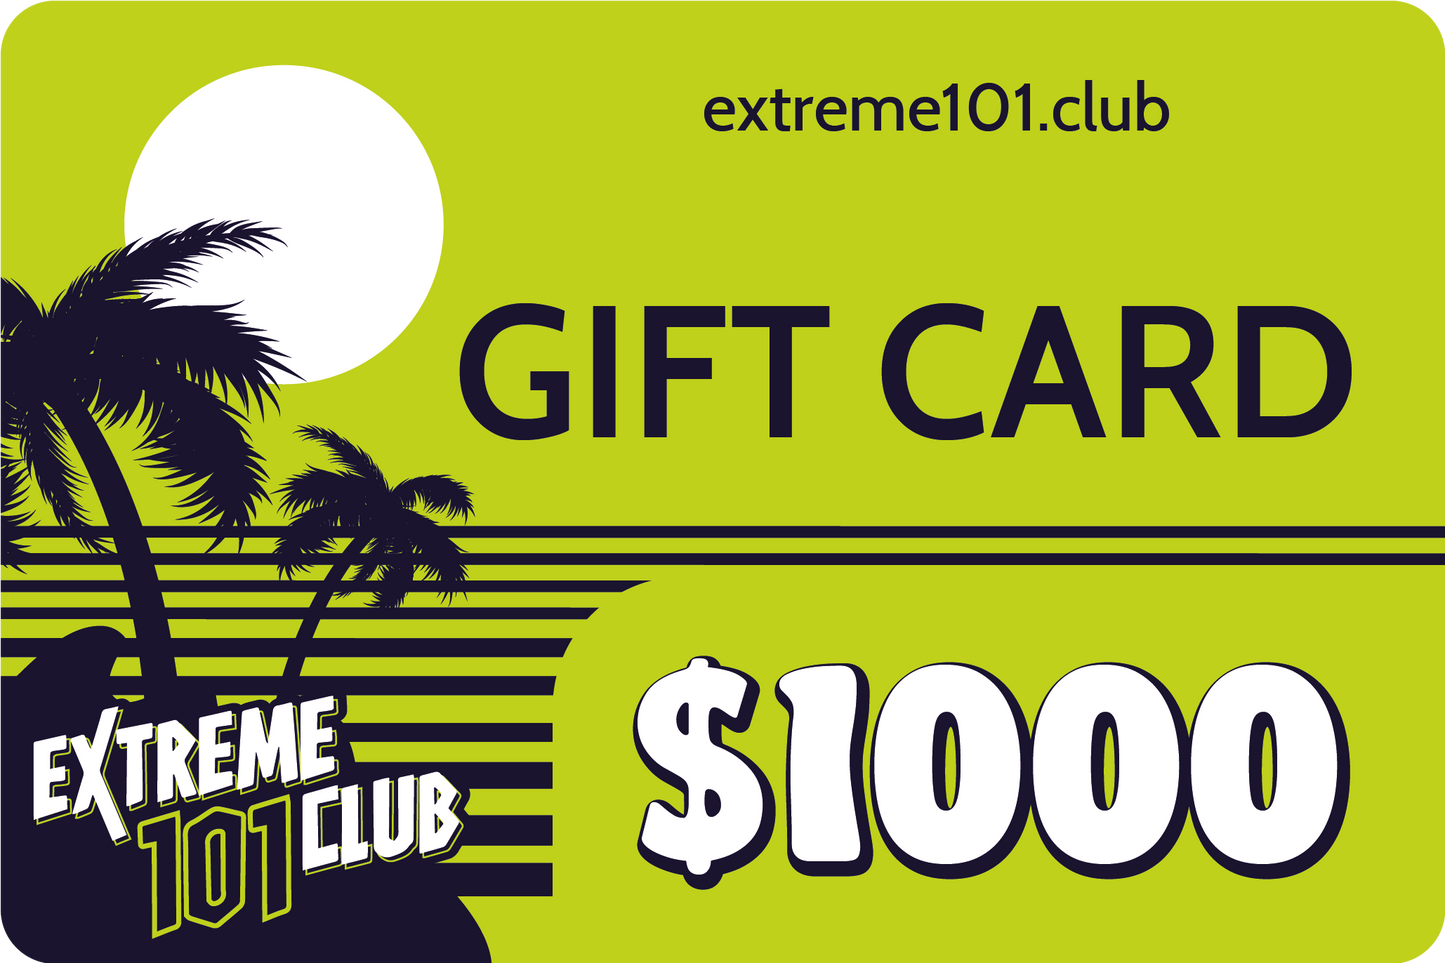 Treat your loved ones with a gift card from Extreme101club.